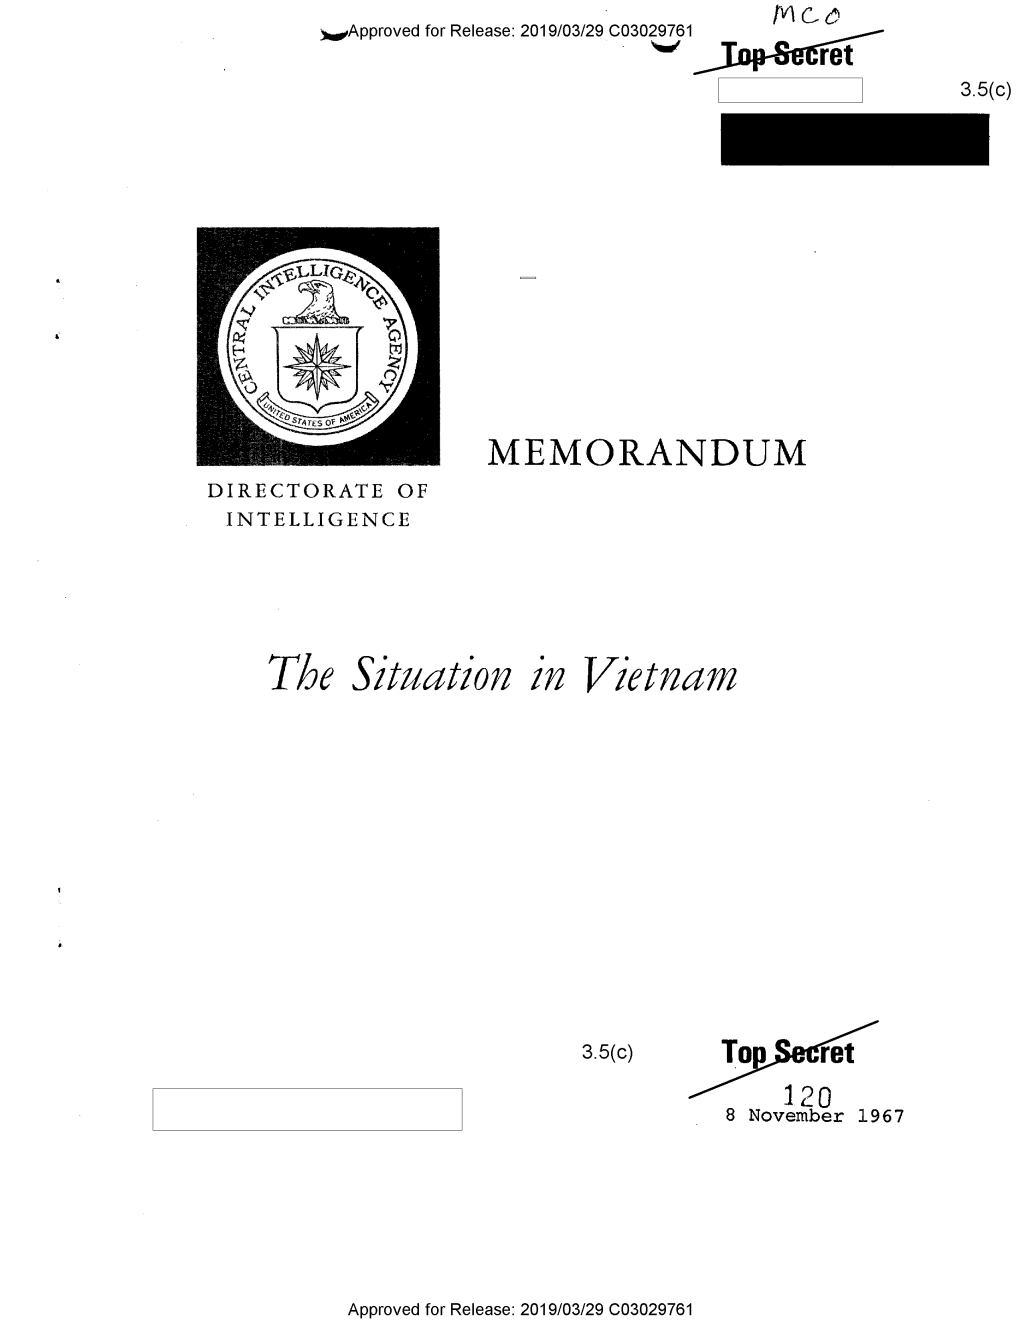 Report on the Situation in Vietnam, 8 November 1967